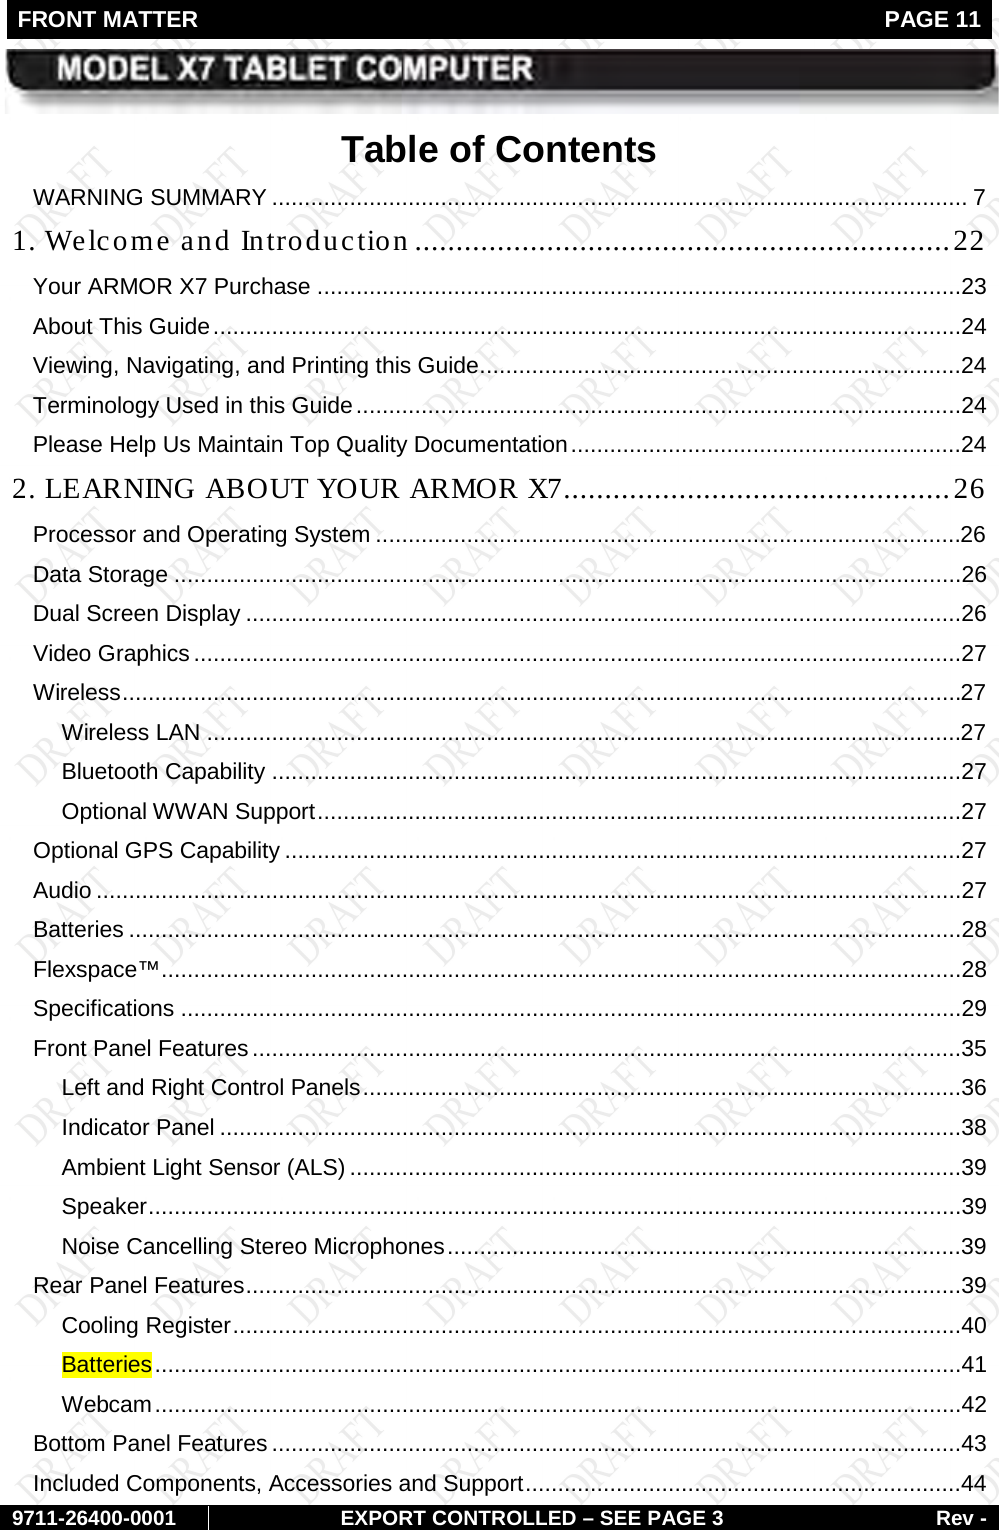 FRONT MATTER   PAGE 11        9711-26400-0001 EXPORT CONTROLLED – SEE PAGE 3 Rev - Table of Contents WARNING SUMMARY ........................................................................................................... 7 1. Welcome and Introduction ................................................................. 22 Your ARMOR X7 Purchase ...................................................................................................23 About This Guide ...................................................................................................................24 Viewing, Navigating, and Printing this Guide ..........................................................................24 Terminology Used in this Guide .............................................................................................24 Please Help Us Maintain Top Quality Documentation ............................................................24 2. LEARNING ABOUT YOUR ARMOR X7 ............................................... 26 Processor and Operating System ..........................................................................................26 Data Storage .........................................................................................................................26 Dual Screen Display ..............................................................................................................26 Video Graphics ......................................................................................................................27 Wireless .................................................................................................................................27 Wireless LAN ....................................................................................................................27 Bluetooth Capability ..........................................................................................................27 Optional WWAN Support ...................................................................................................27 Optional GPS Capability ........................................................................................................27 Audio .....................................................................................................................................27 Batteries ................................................................................................................................28 Flexspace™ ...........................................................................................................................28 Specifications ........................................................................................................................29 Front Panel Features .............................................................................................................35 Left and Right Control Panels ............................................................................................36 Indicator Panel ..................................................................................................................38 Ambient Light Sensor (ALS) ..............................................................................................39 Speaker .............................................................................................................................39 Noise Cancelling Stereo Microphones ...............................................................................39 Rear Panel Features ..............................................................................................................39 Cooling Register ................................................................................................................40 Batteries ............................................................................................................................41 Webcam ............................................................................................................................42 Bottom Panel Features ..........................................................................................................43 Included Components, Accessories and Support ...................................................................44 